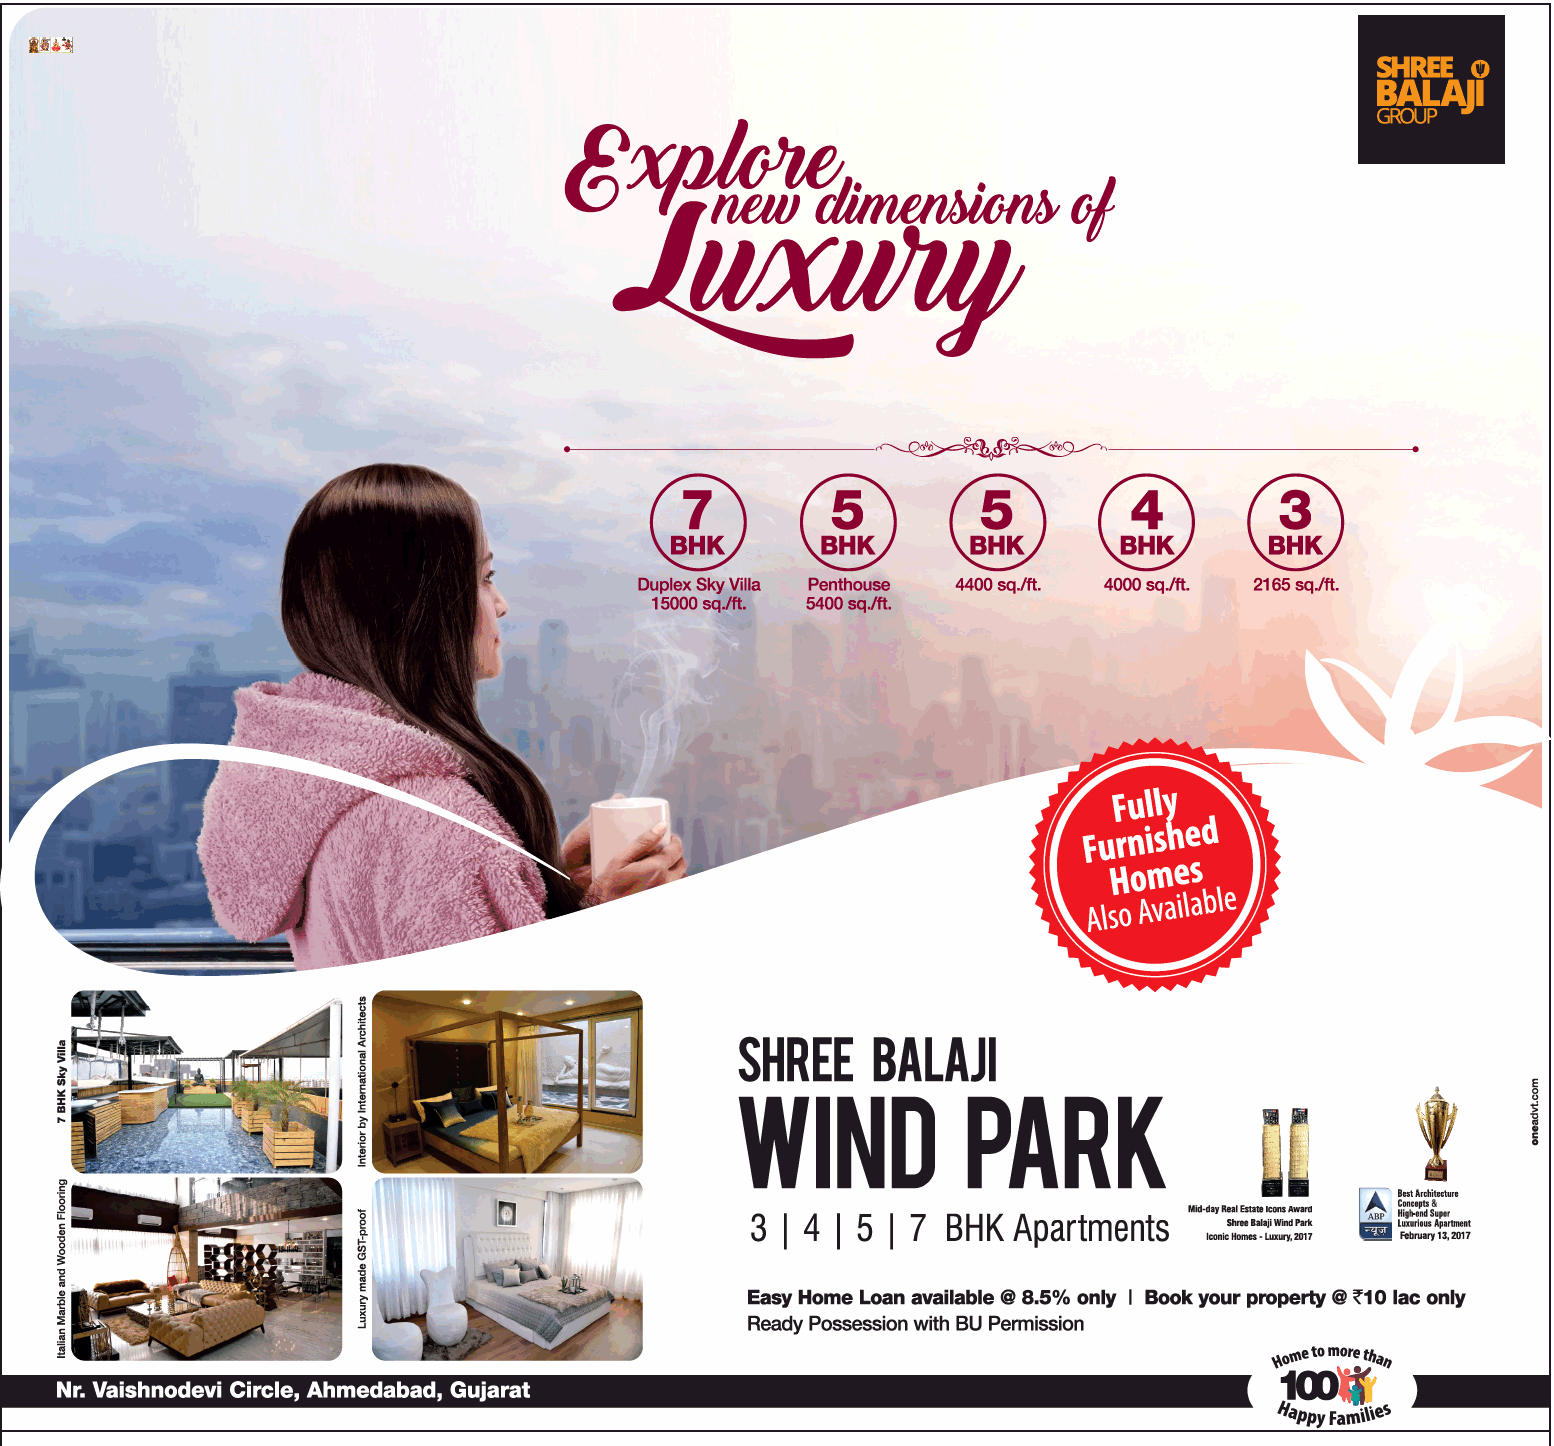 Fully furnished homes also available at Shree Balaji Wind Park in Ahmedabad